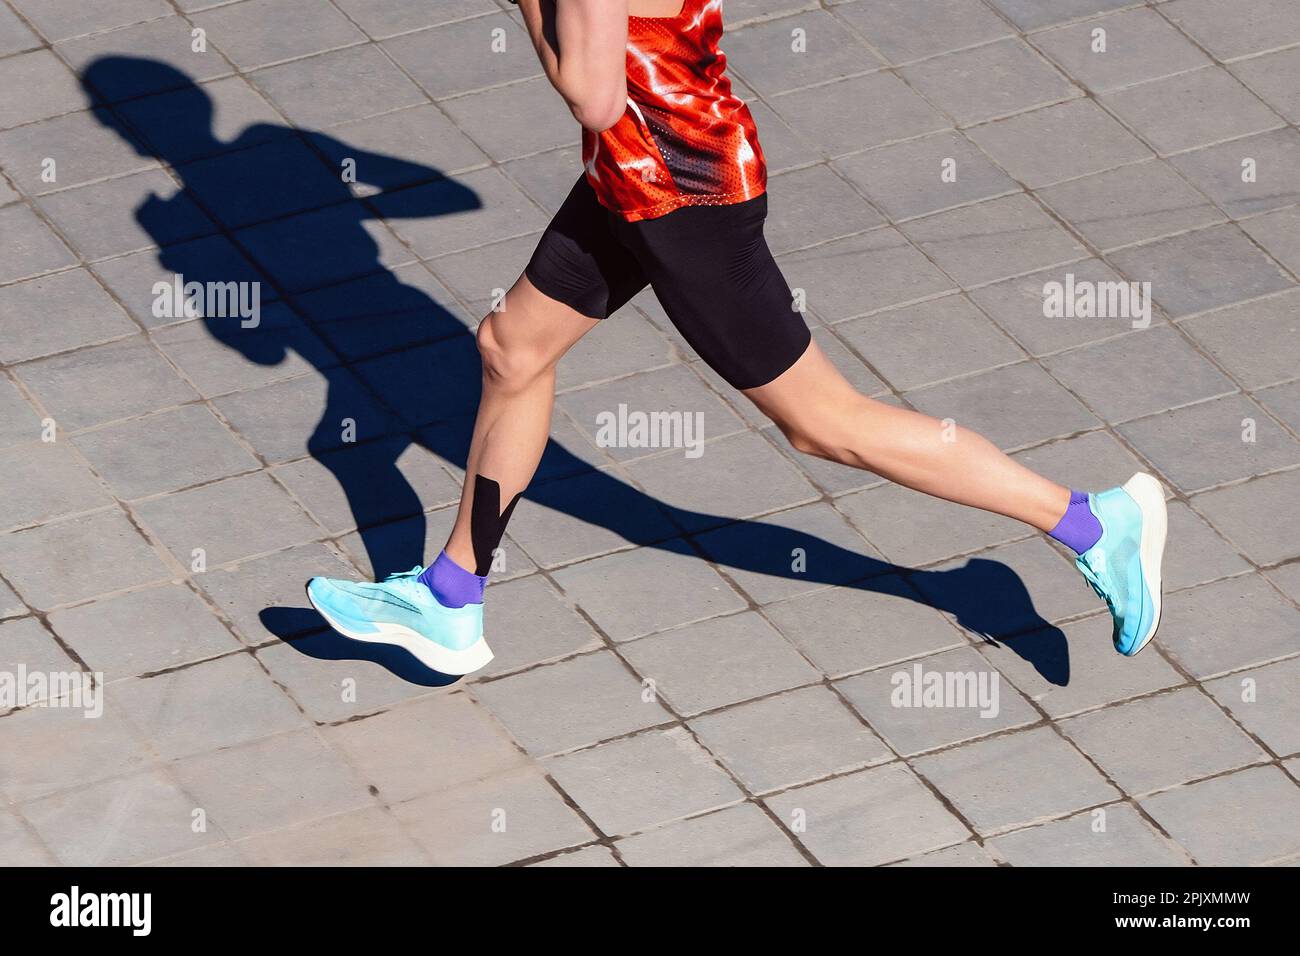 top view runner athlete running marathon race, shadow jogger on paving slabs, kinesiotaping of calf muscle Stock Photo